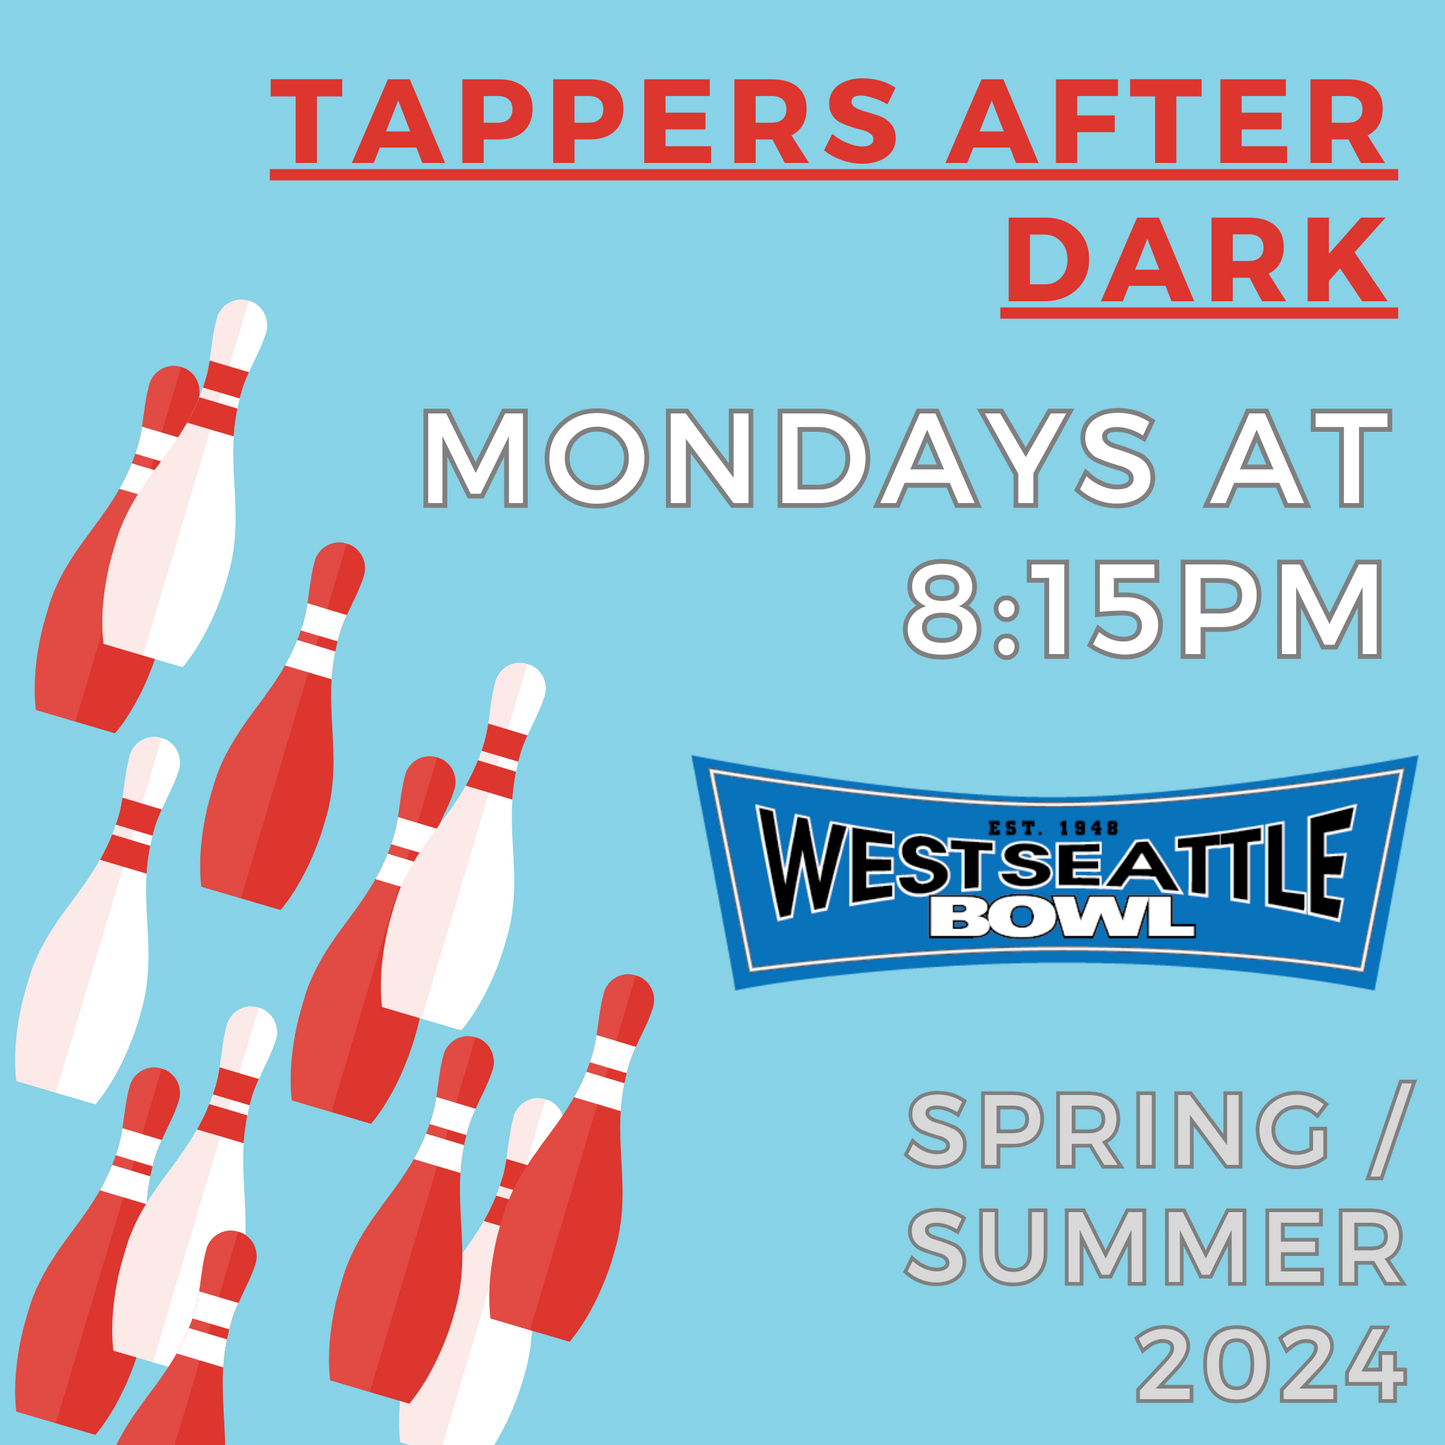 Tappers After Dark - Mondays at 8:15pm - Spring/Summer 2024